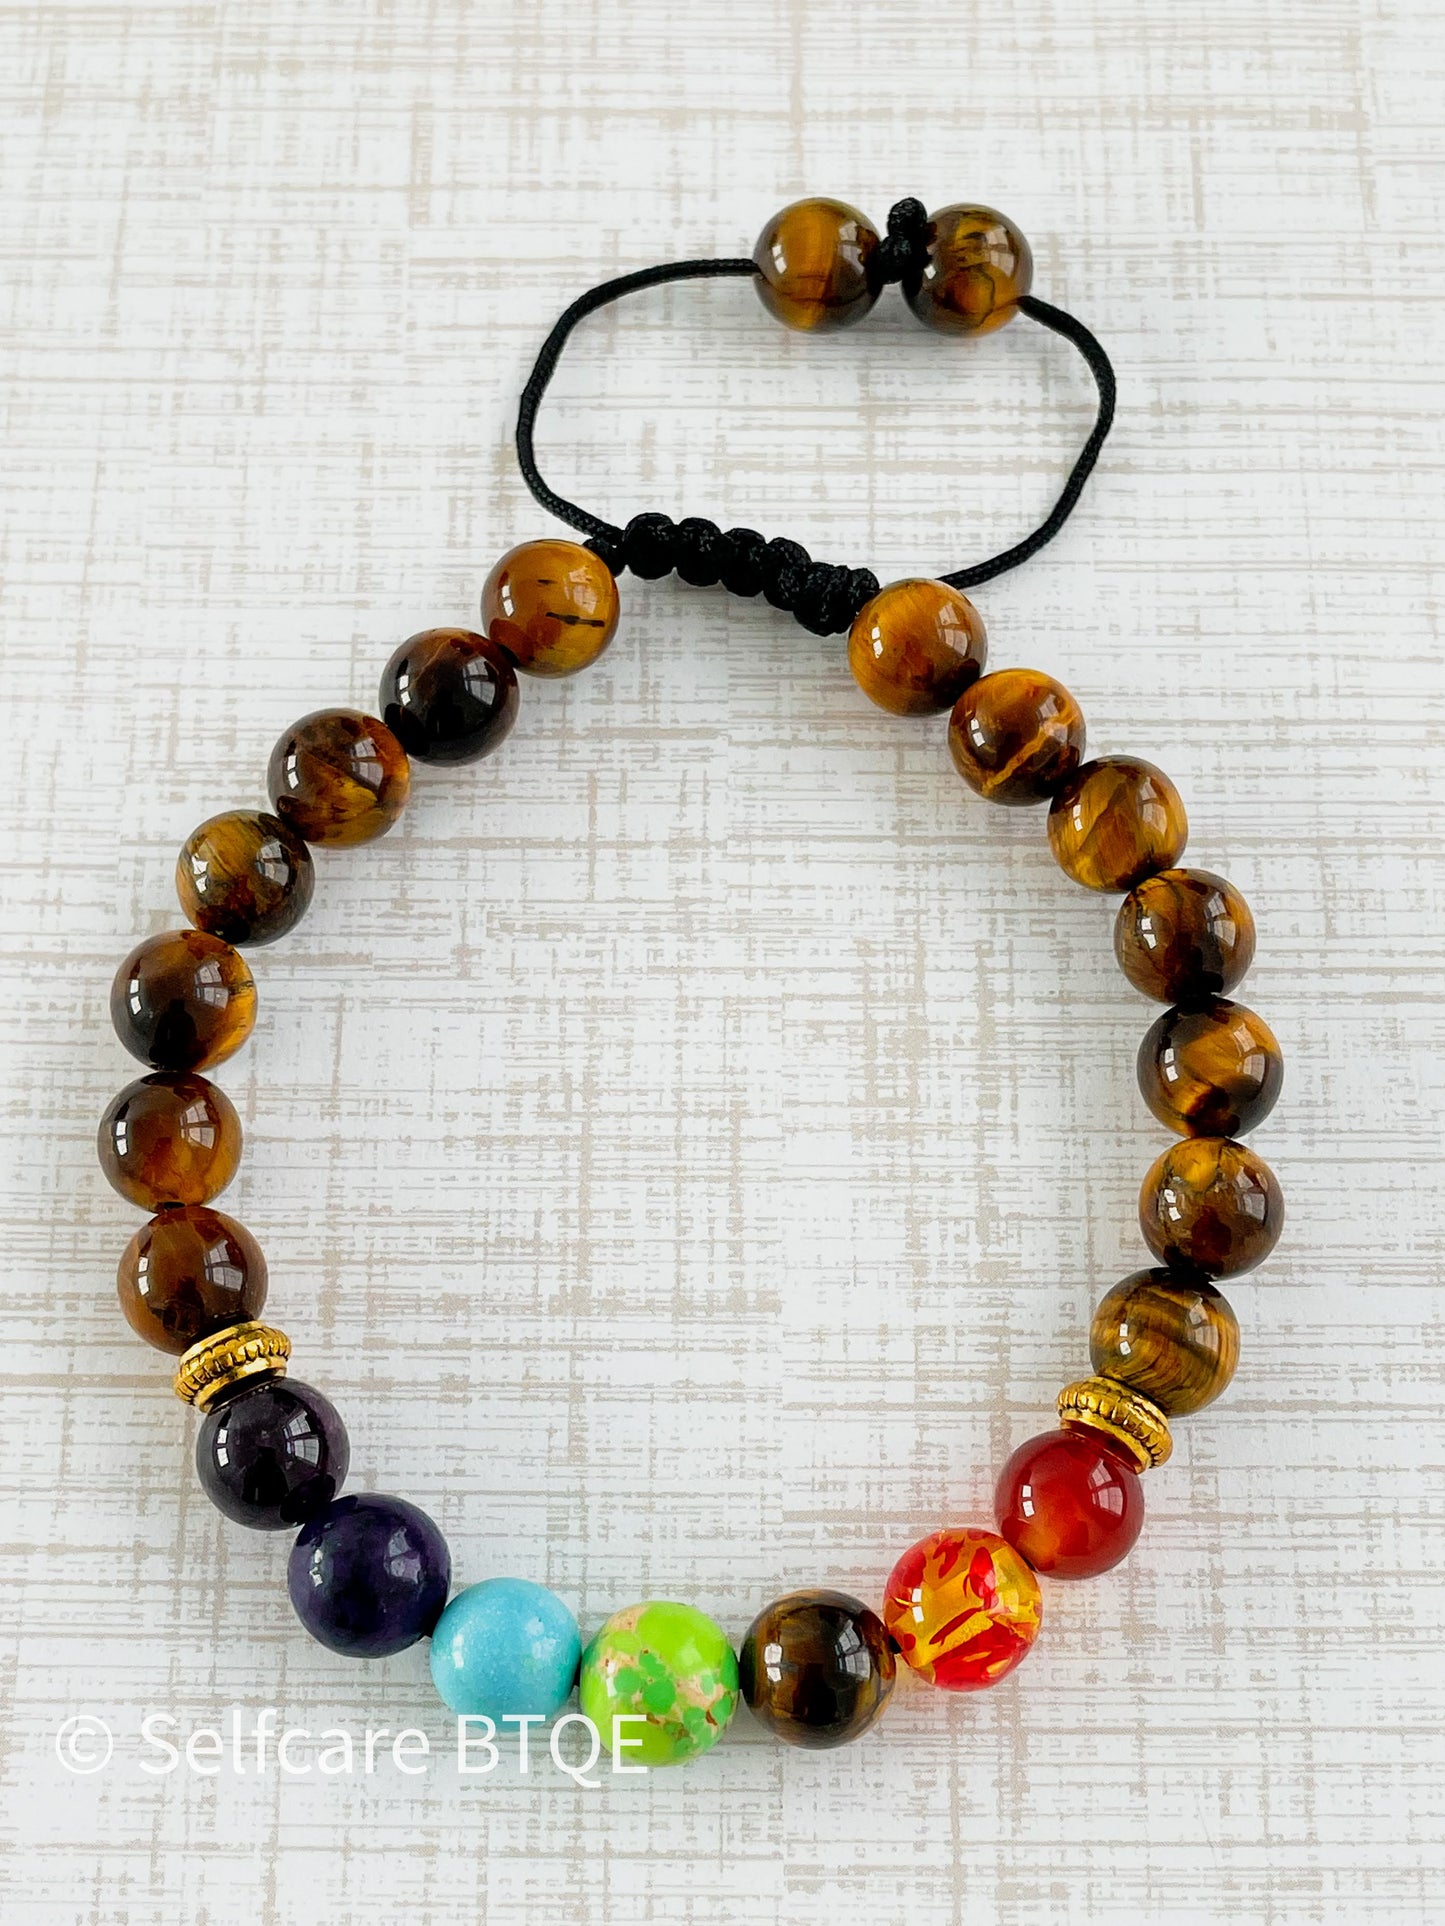 ABCGEMS African Tri-Color Tigers Eye Beads (Gorgeous Matrix- Mohs Hardness  7) Healing Chakra Energy Crystal Stone Ideal for Bracelet Necklace Ring DIY